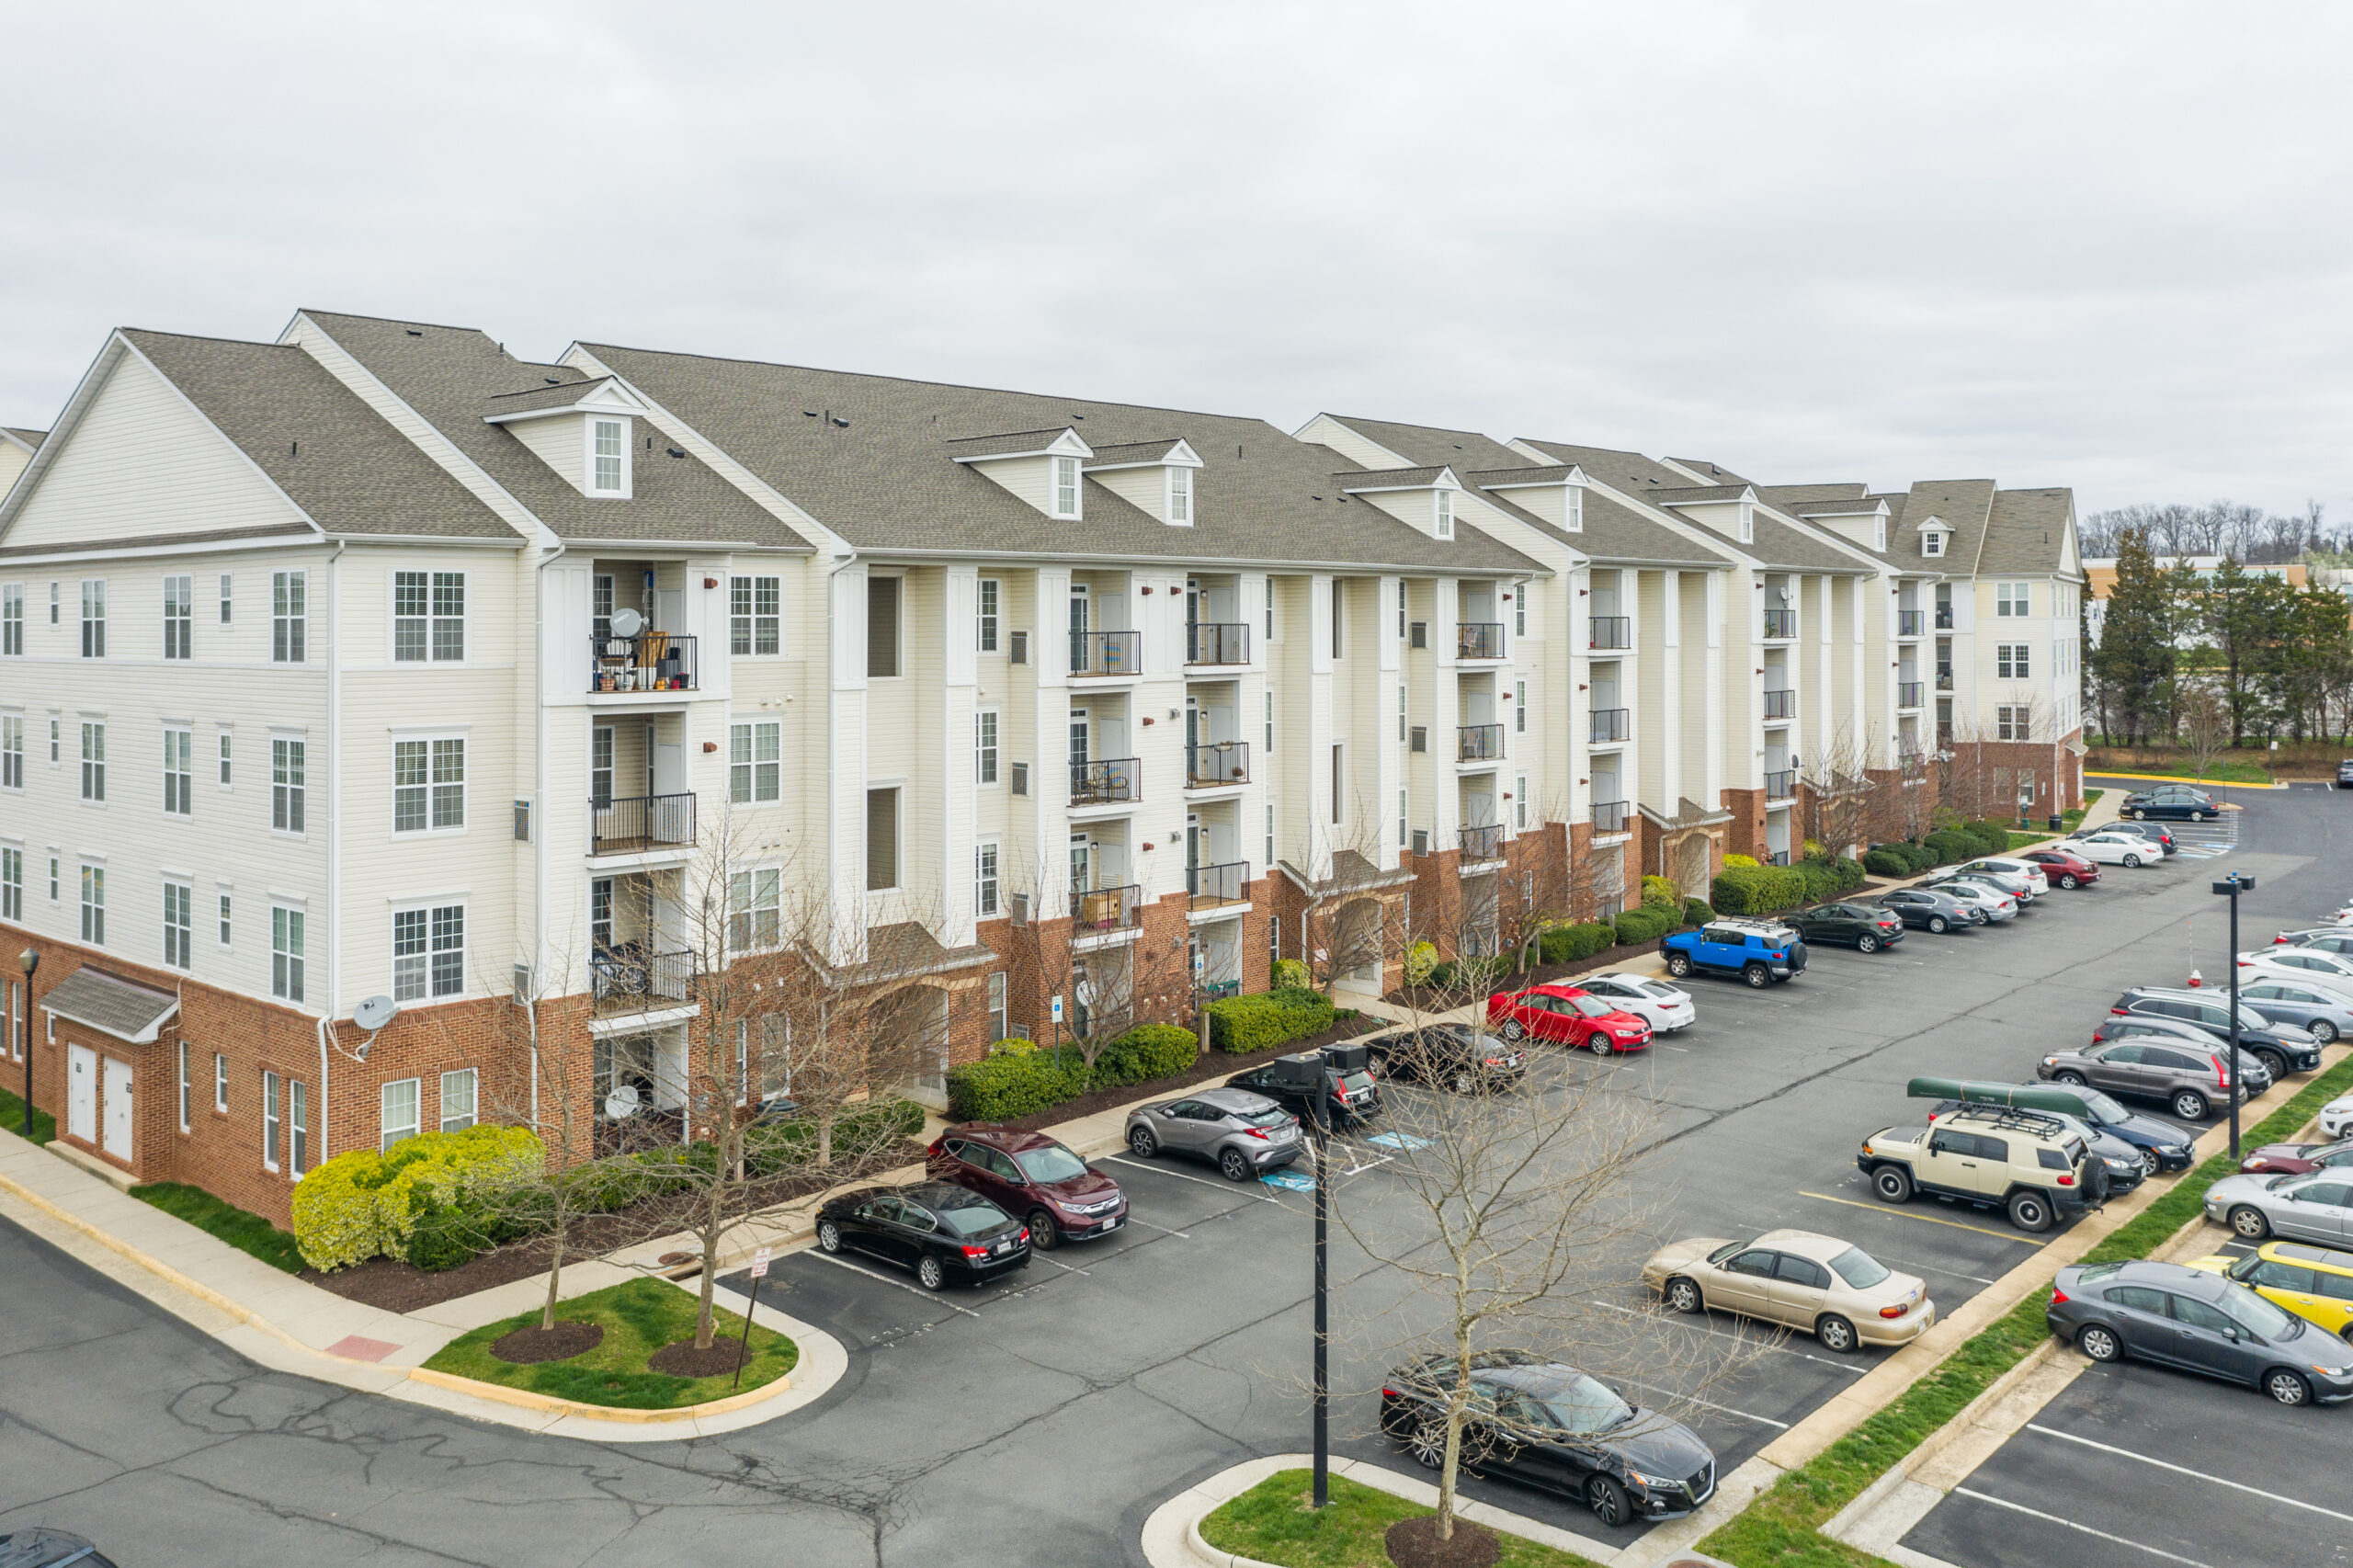 Exterior photo of multifamily property and parking lot with cars